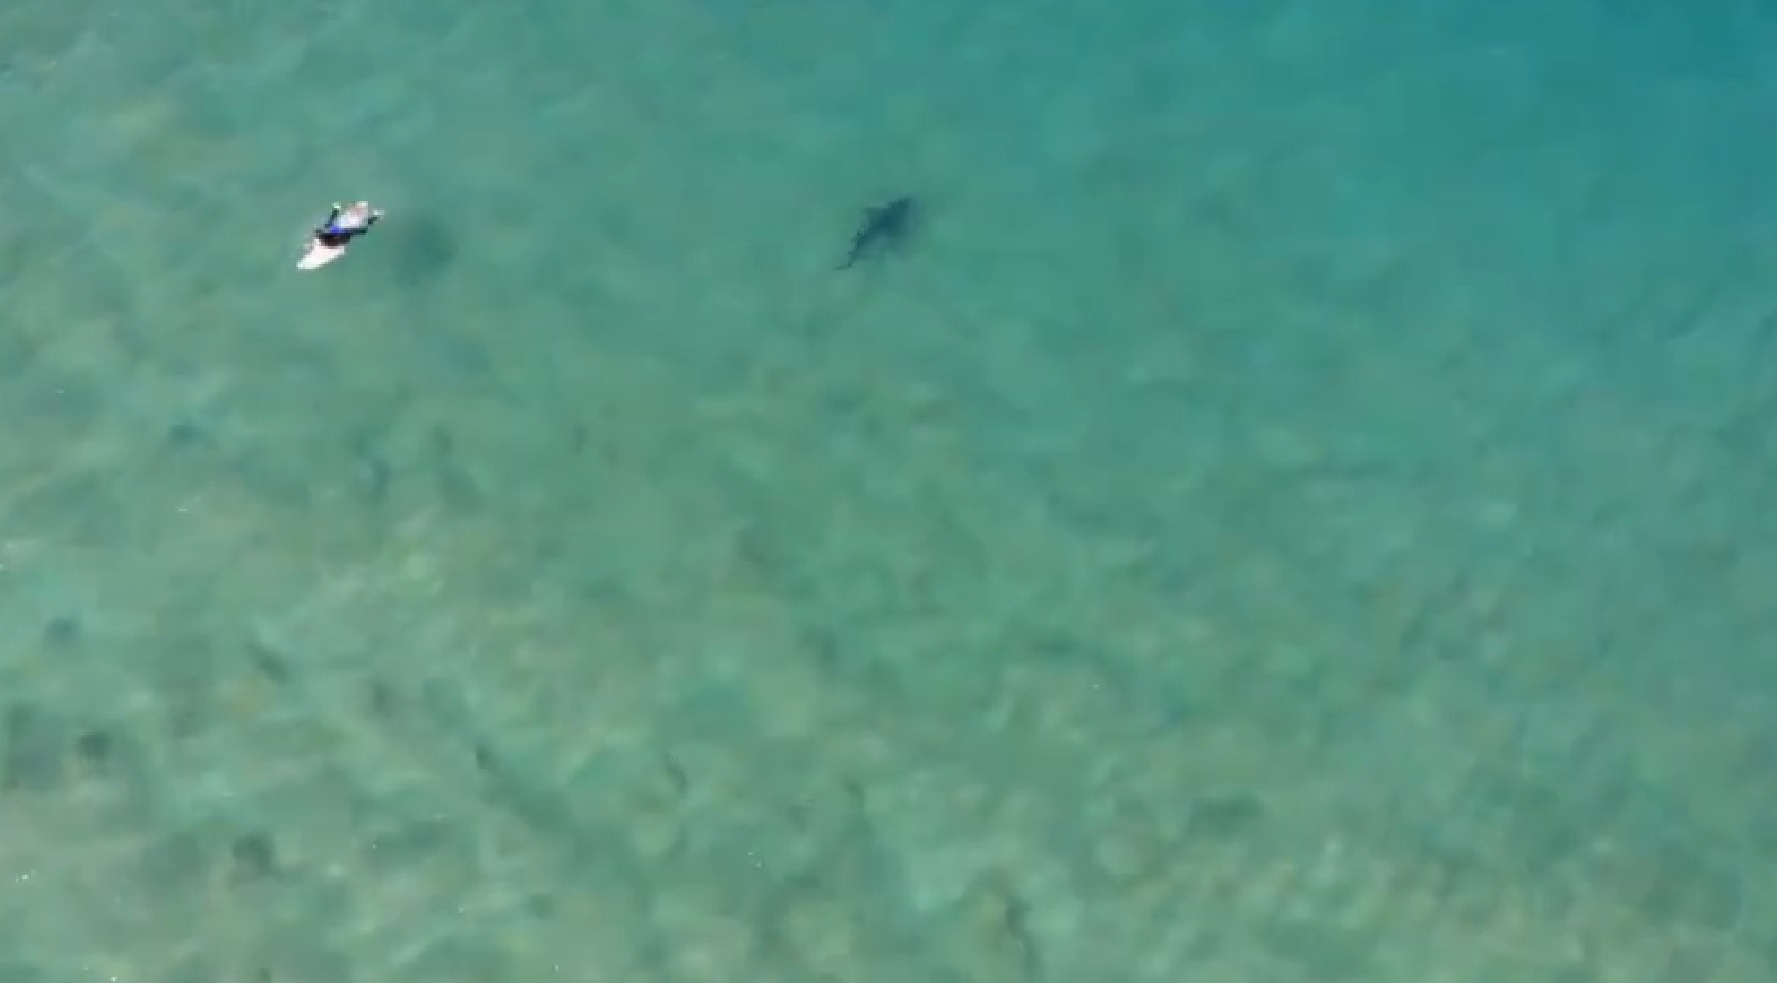 After the drone warning, the surfer paddled towards land while the shark swam in the opposite direction